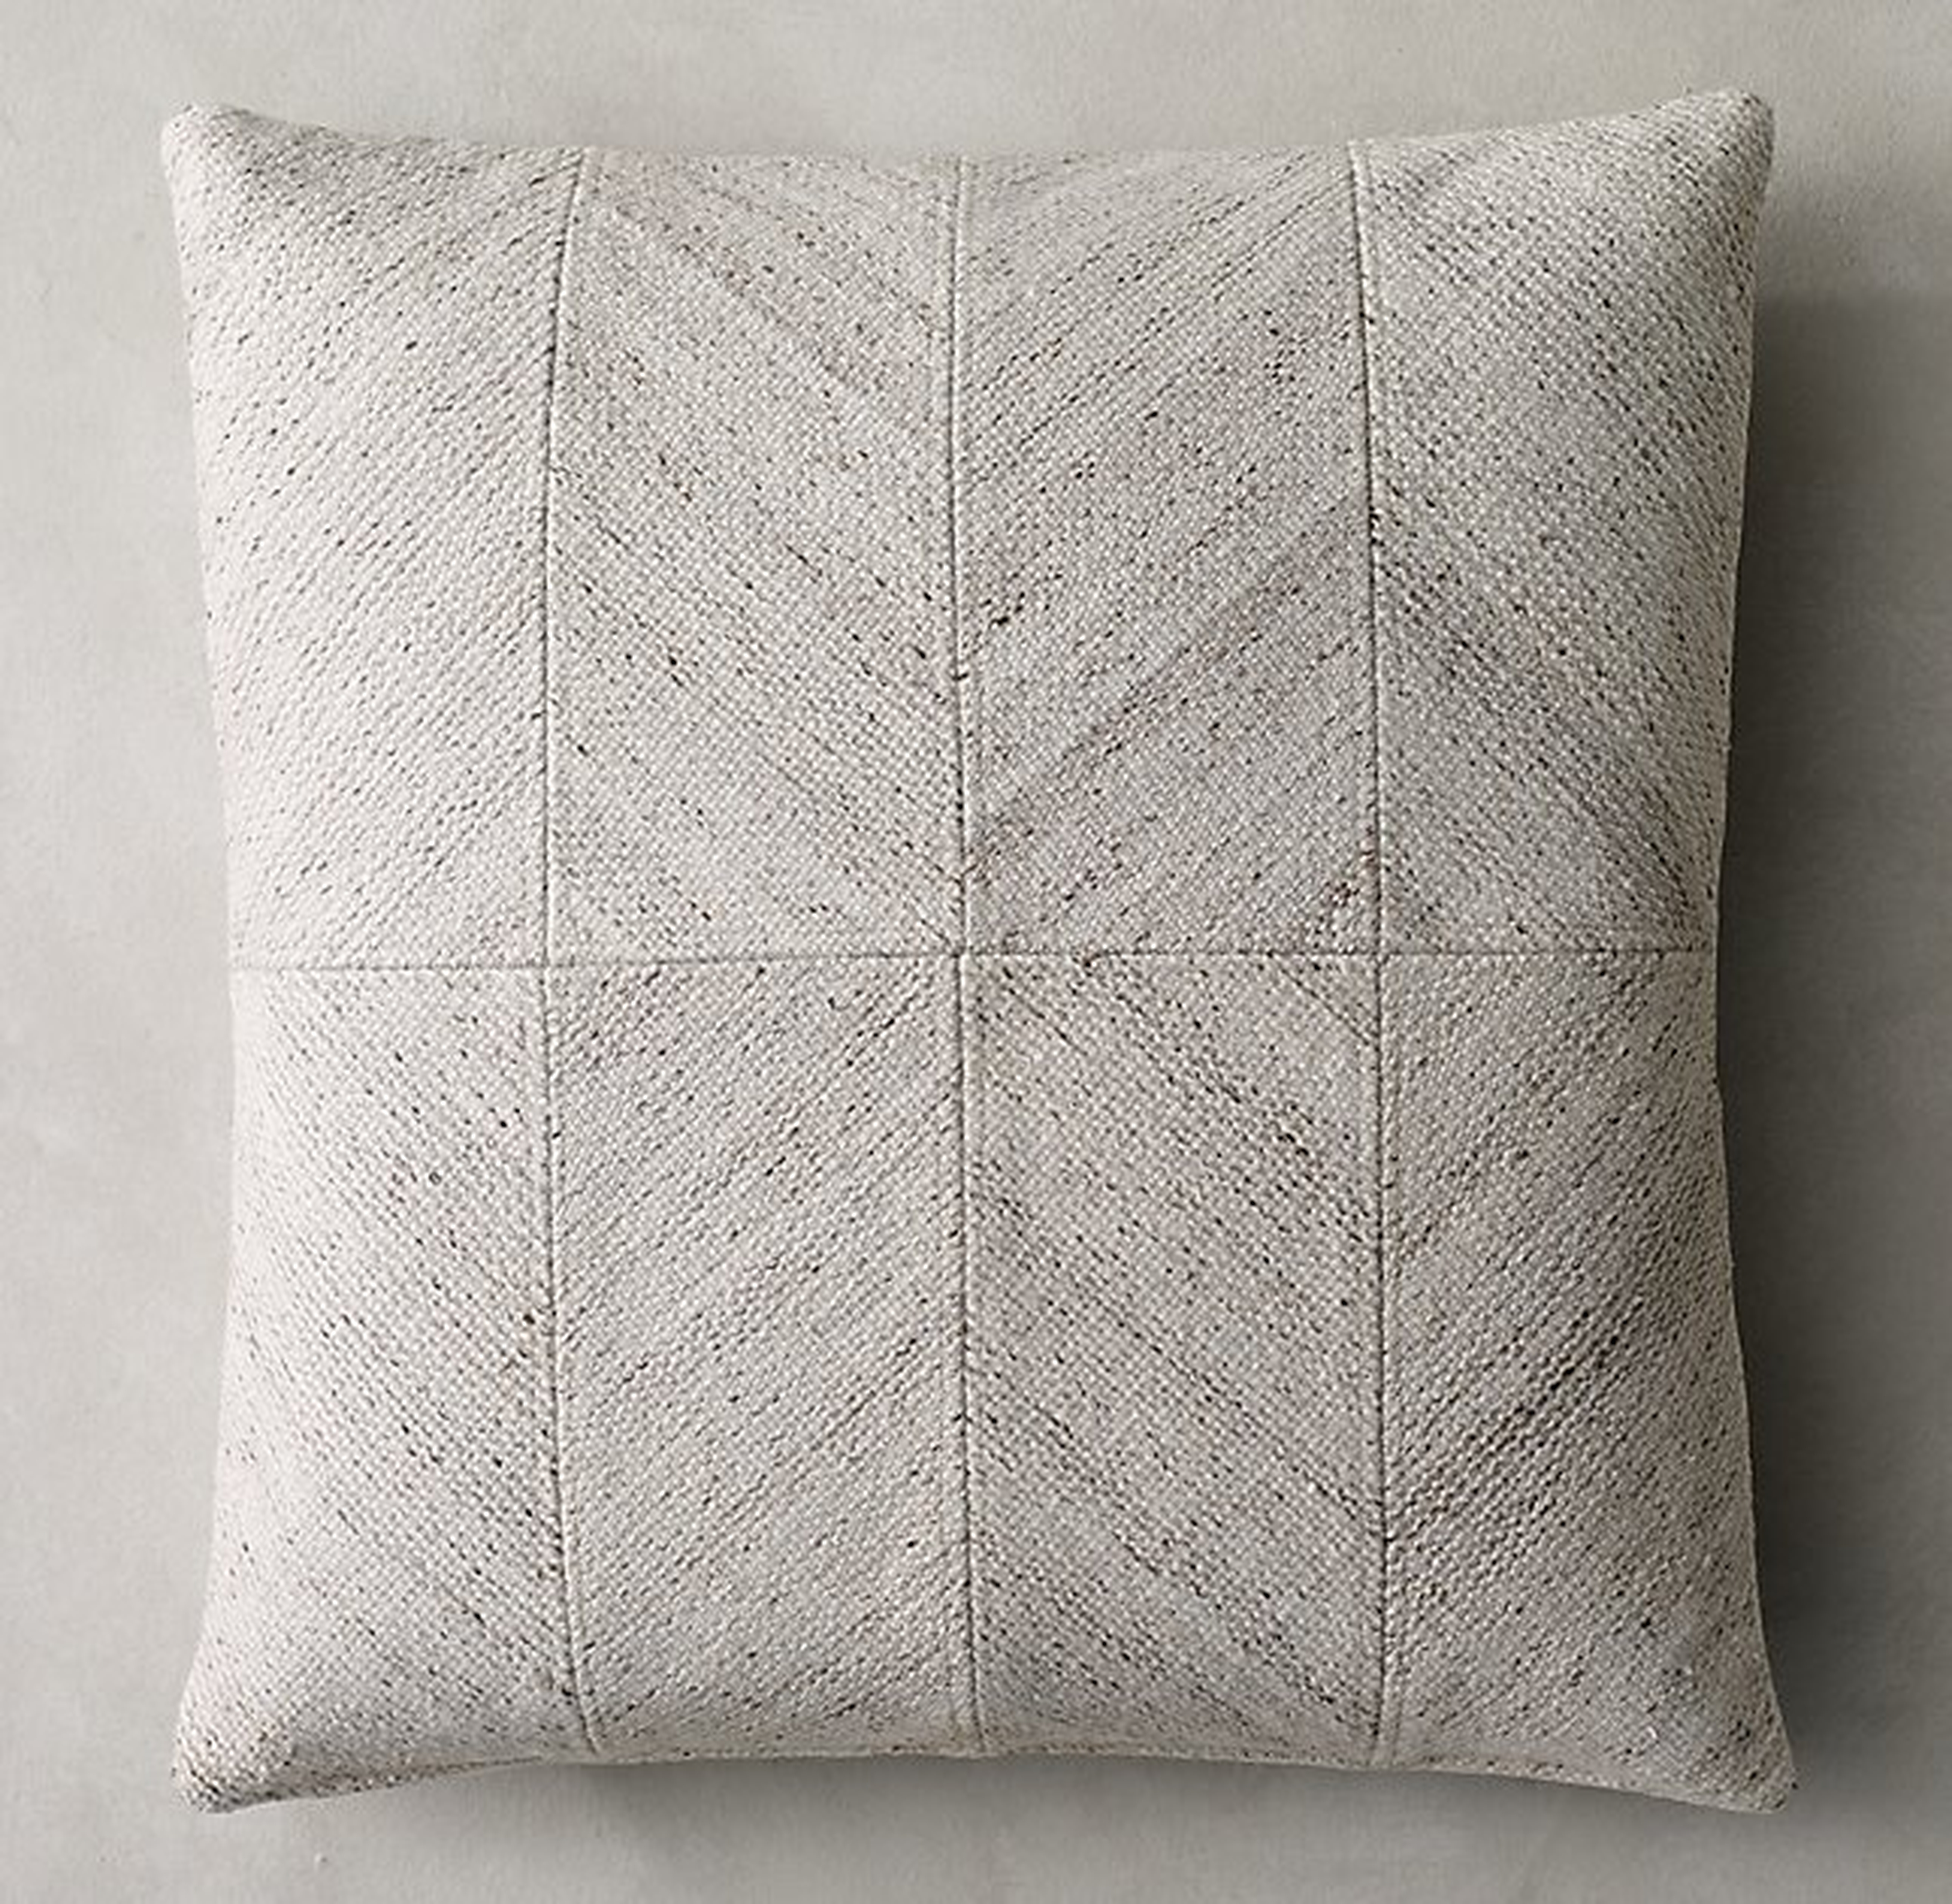 Piazza Pillow Cover - Square - 22" x 22" - Natural -  Insert sold separately - RH